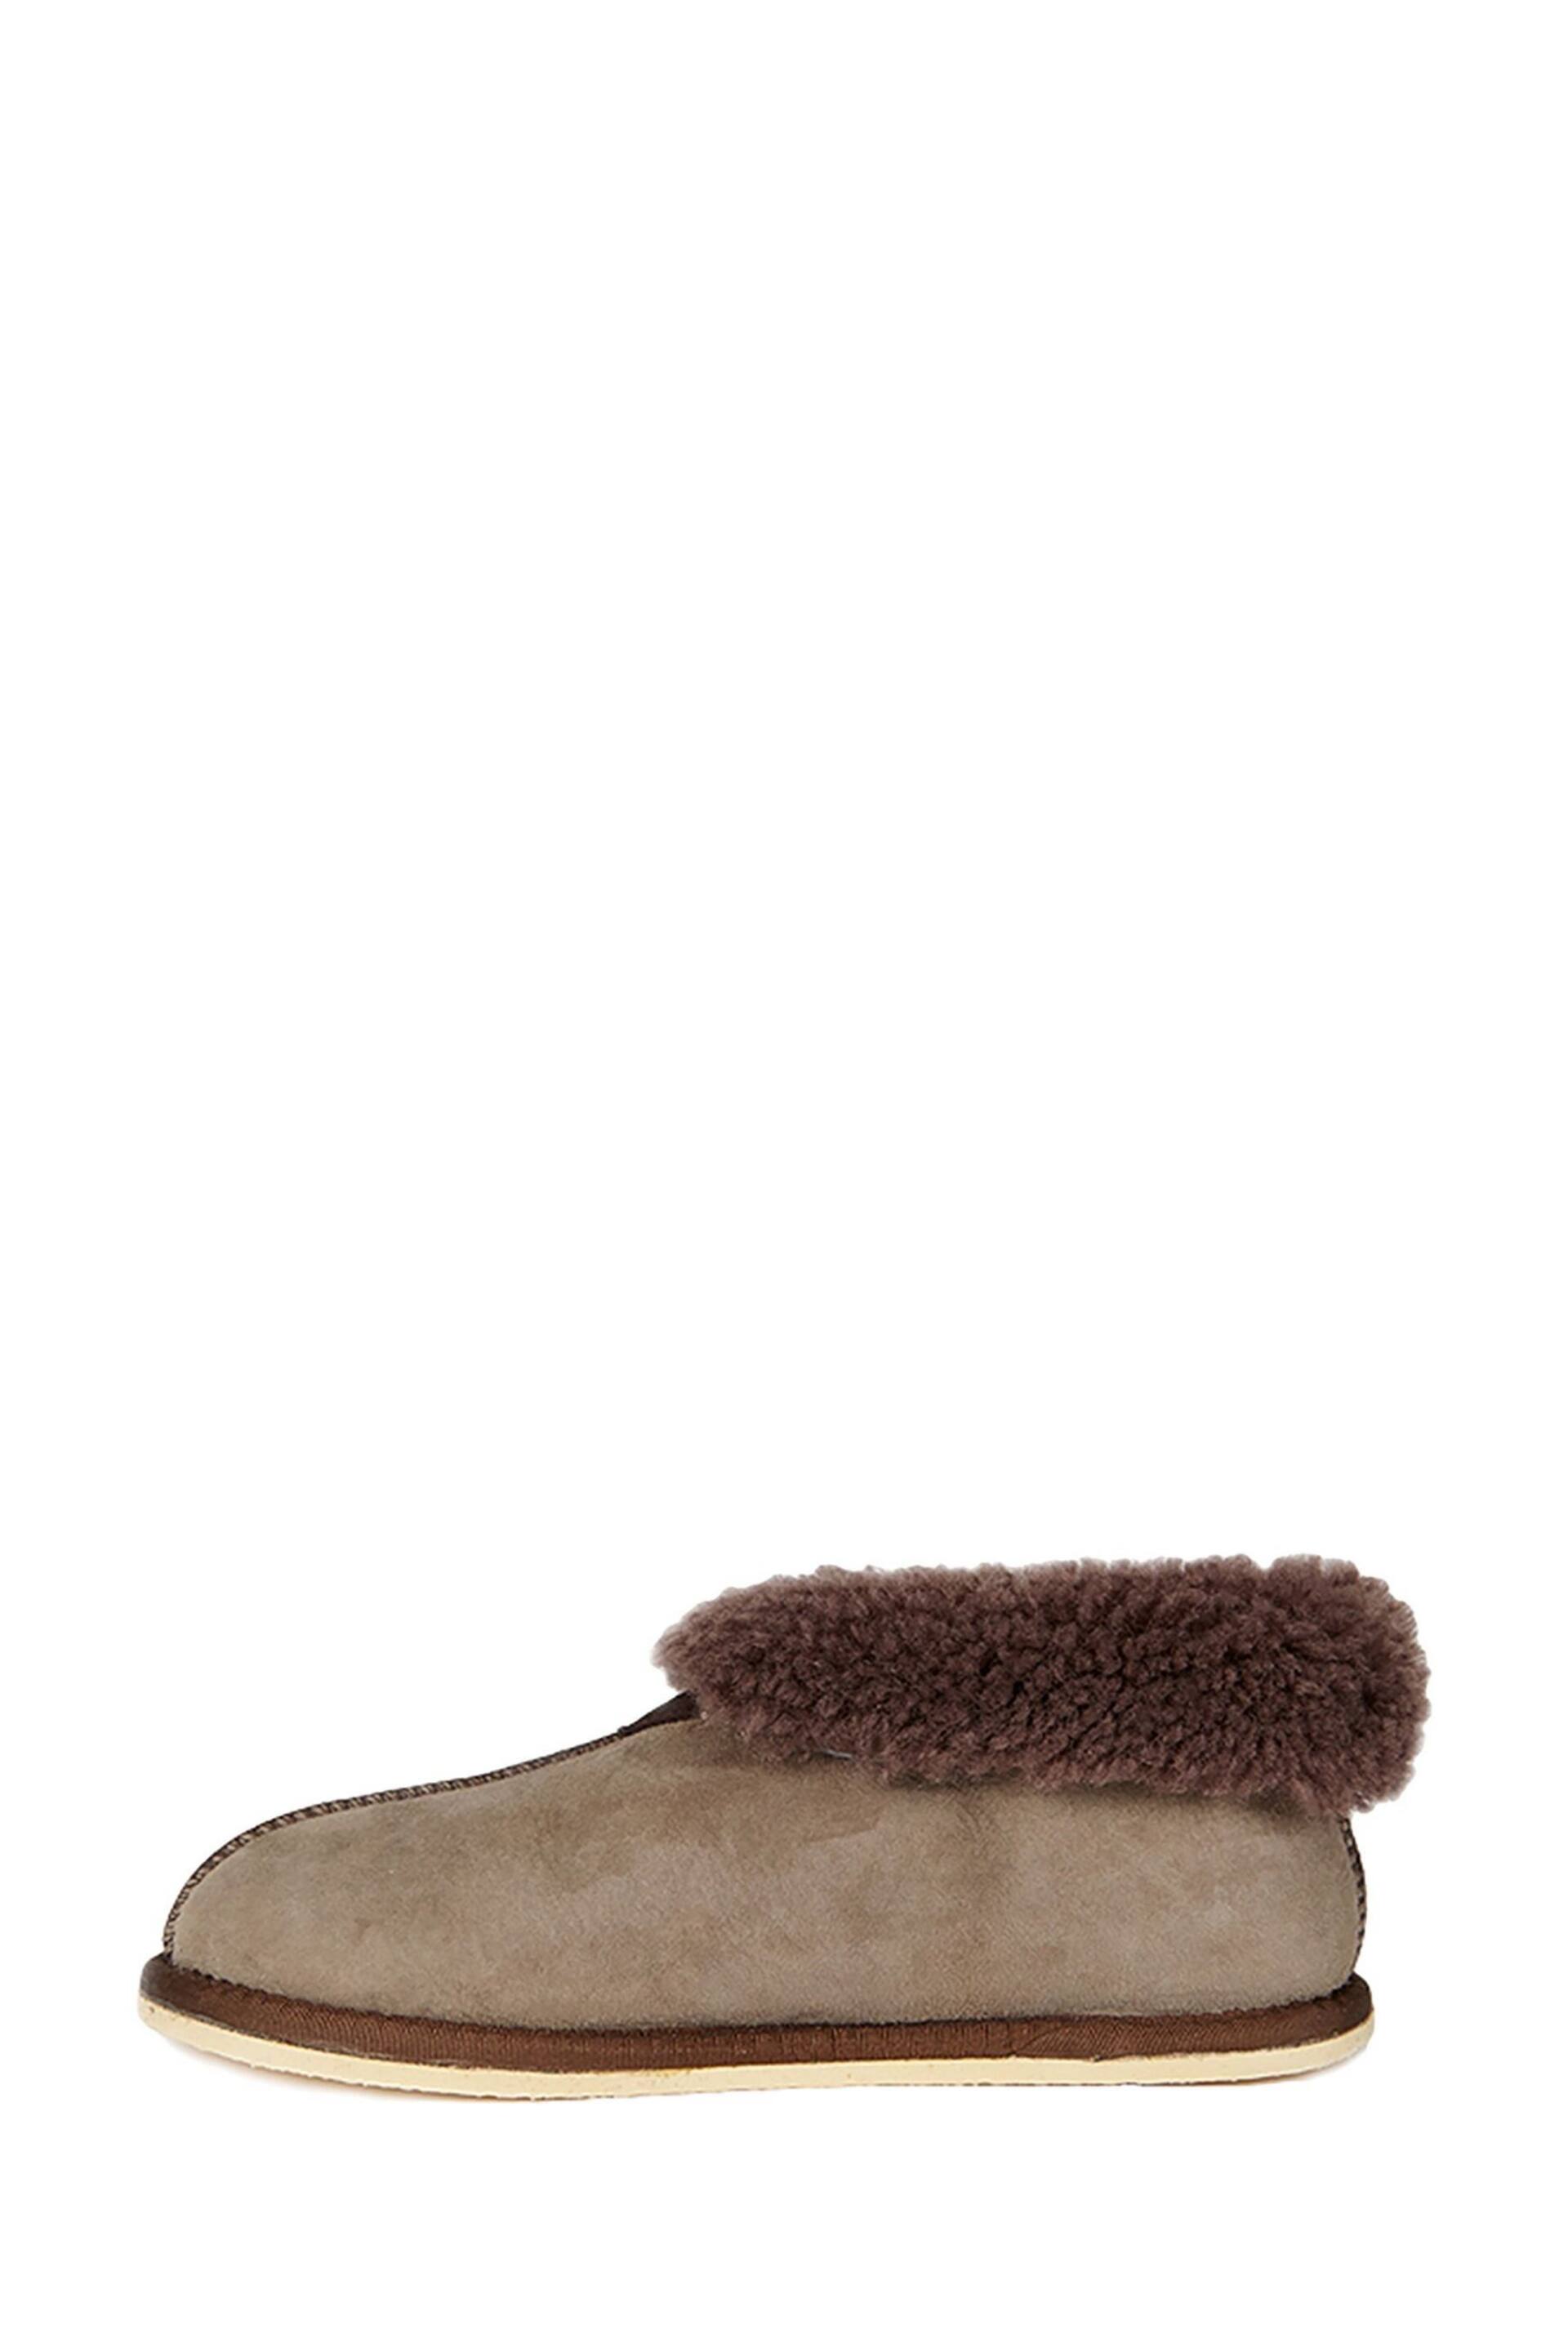 Celtic & Co. Ladies Pink Sheepskin Bootee Slippers - Image 2 of 5